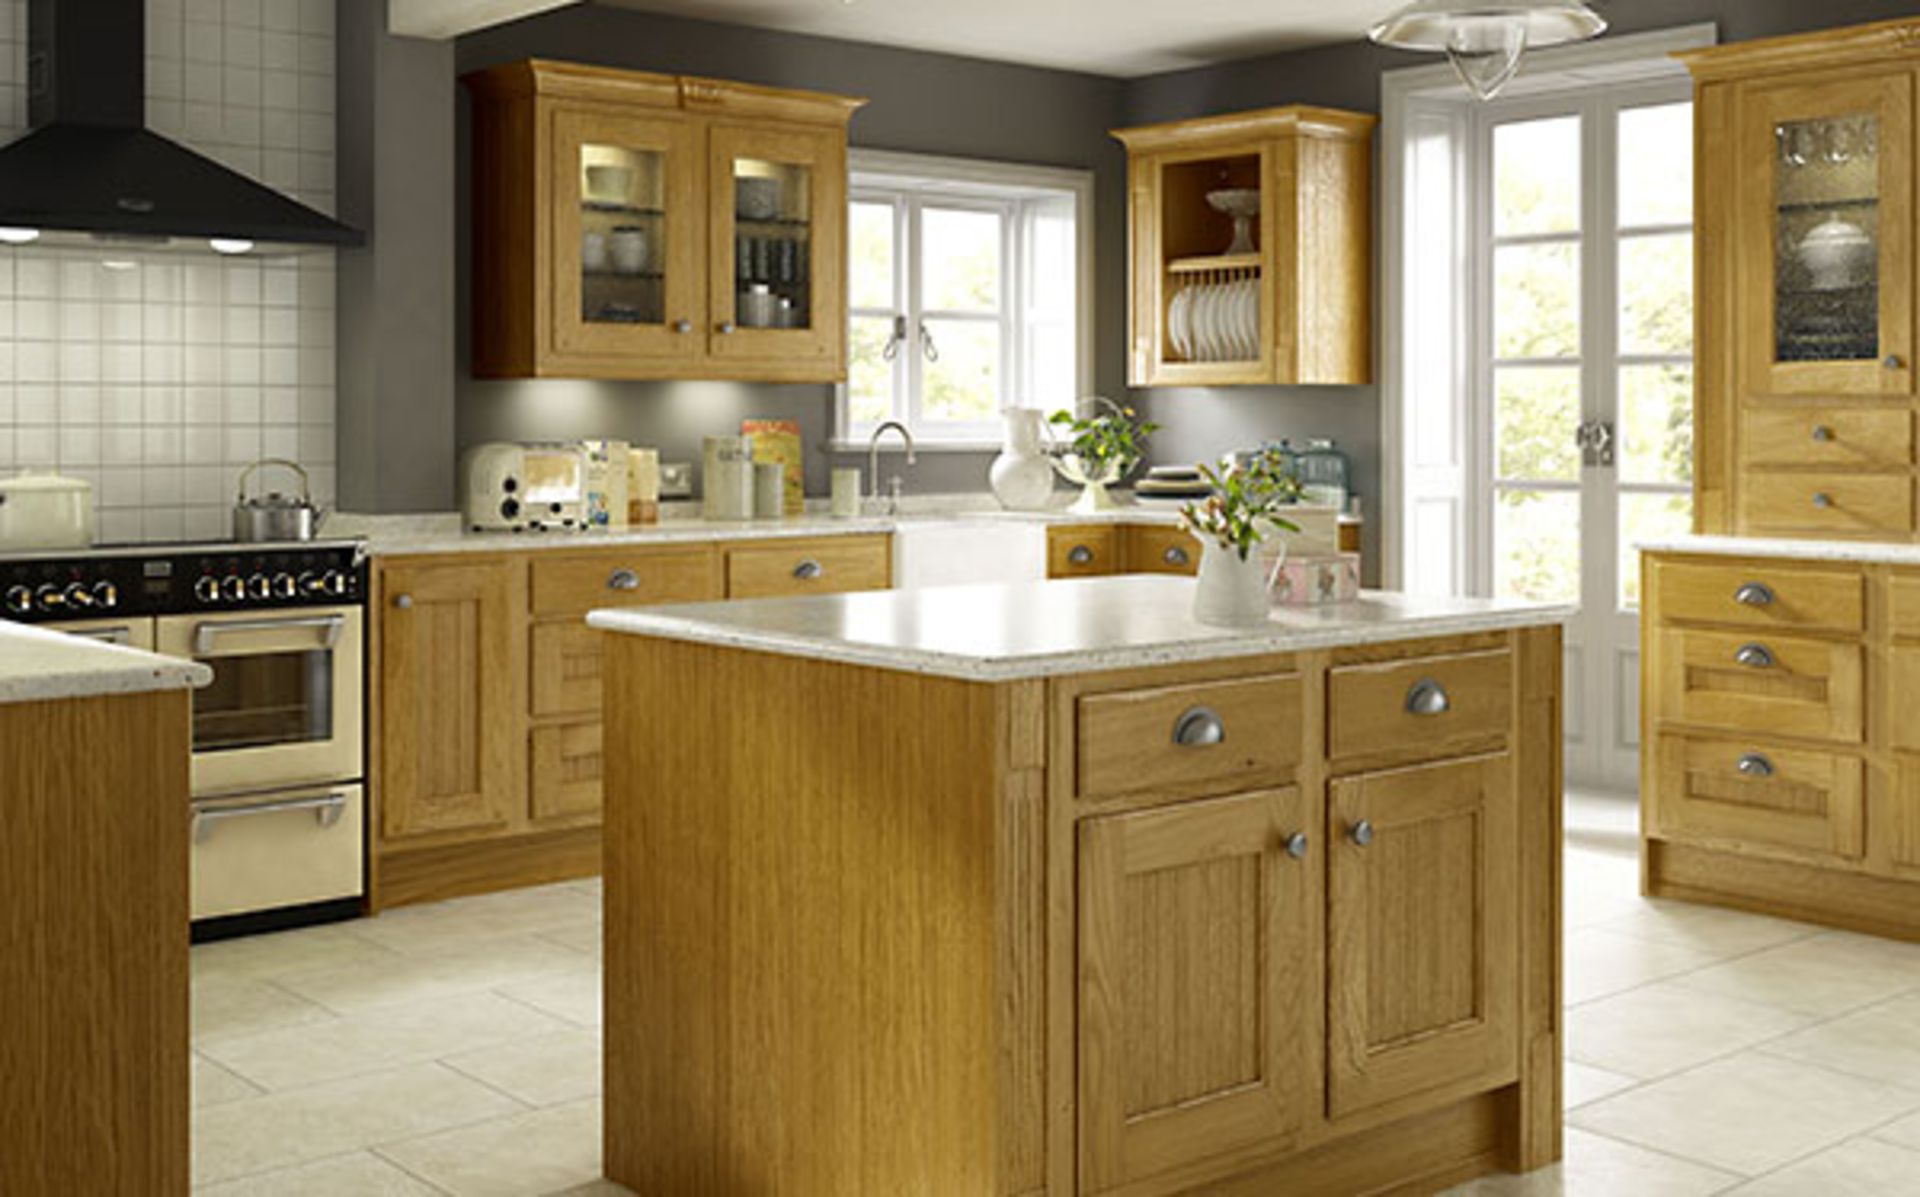 Circa 4,550 items of Kitchen Goods from the following ranges: Anthracite Gloss, Sandford Textured - Image 3 of 17